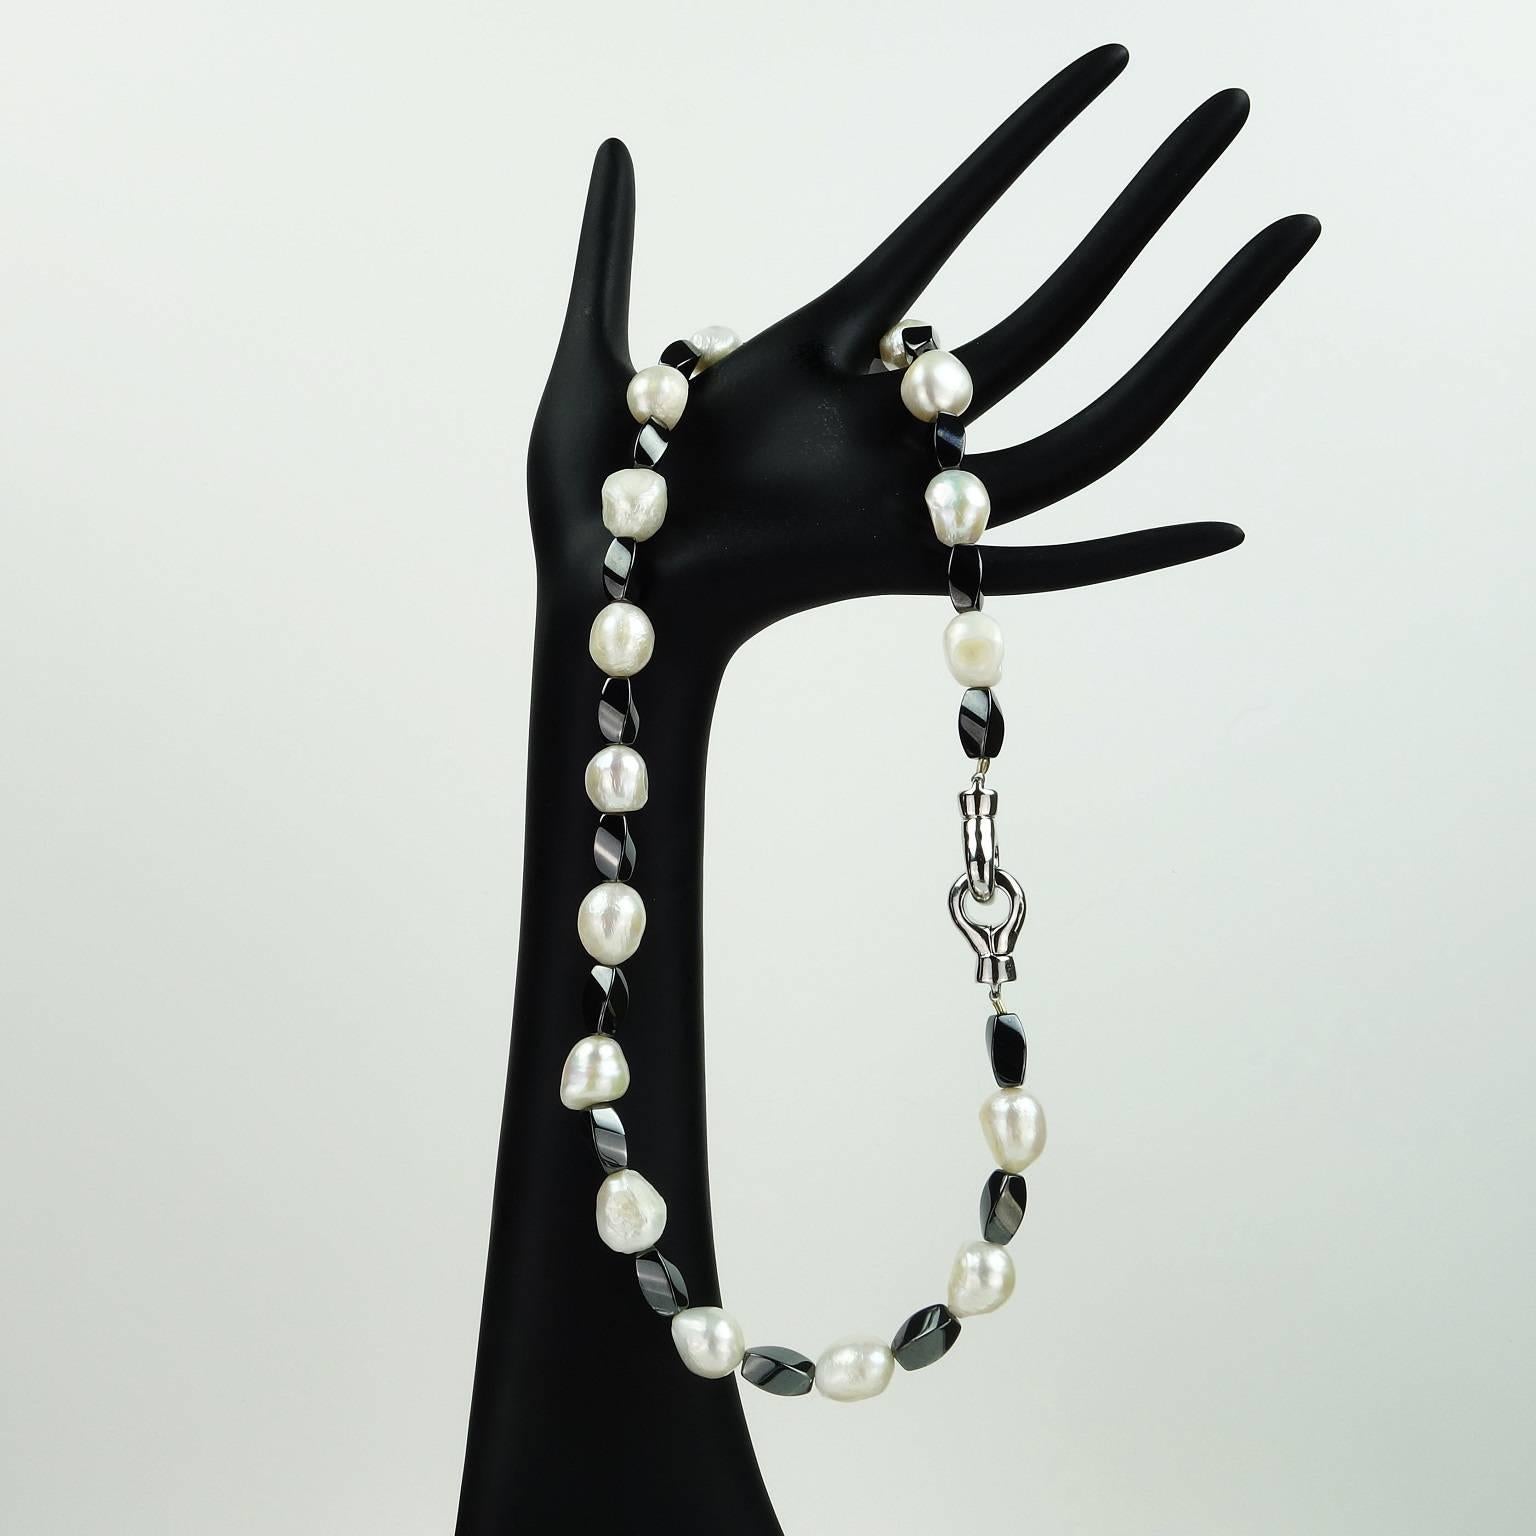 White Pearl and Interesting Twisted Hematite Beads combined in Elegant 19.5 inch necklace with silver tone clasp. Wear this with all your ensembles to kick them up a notch. Pearl in the traditional June birthstone.